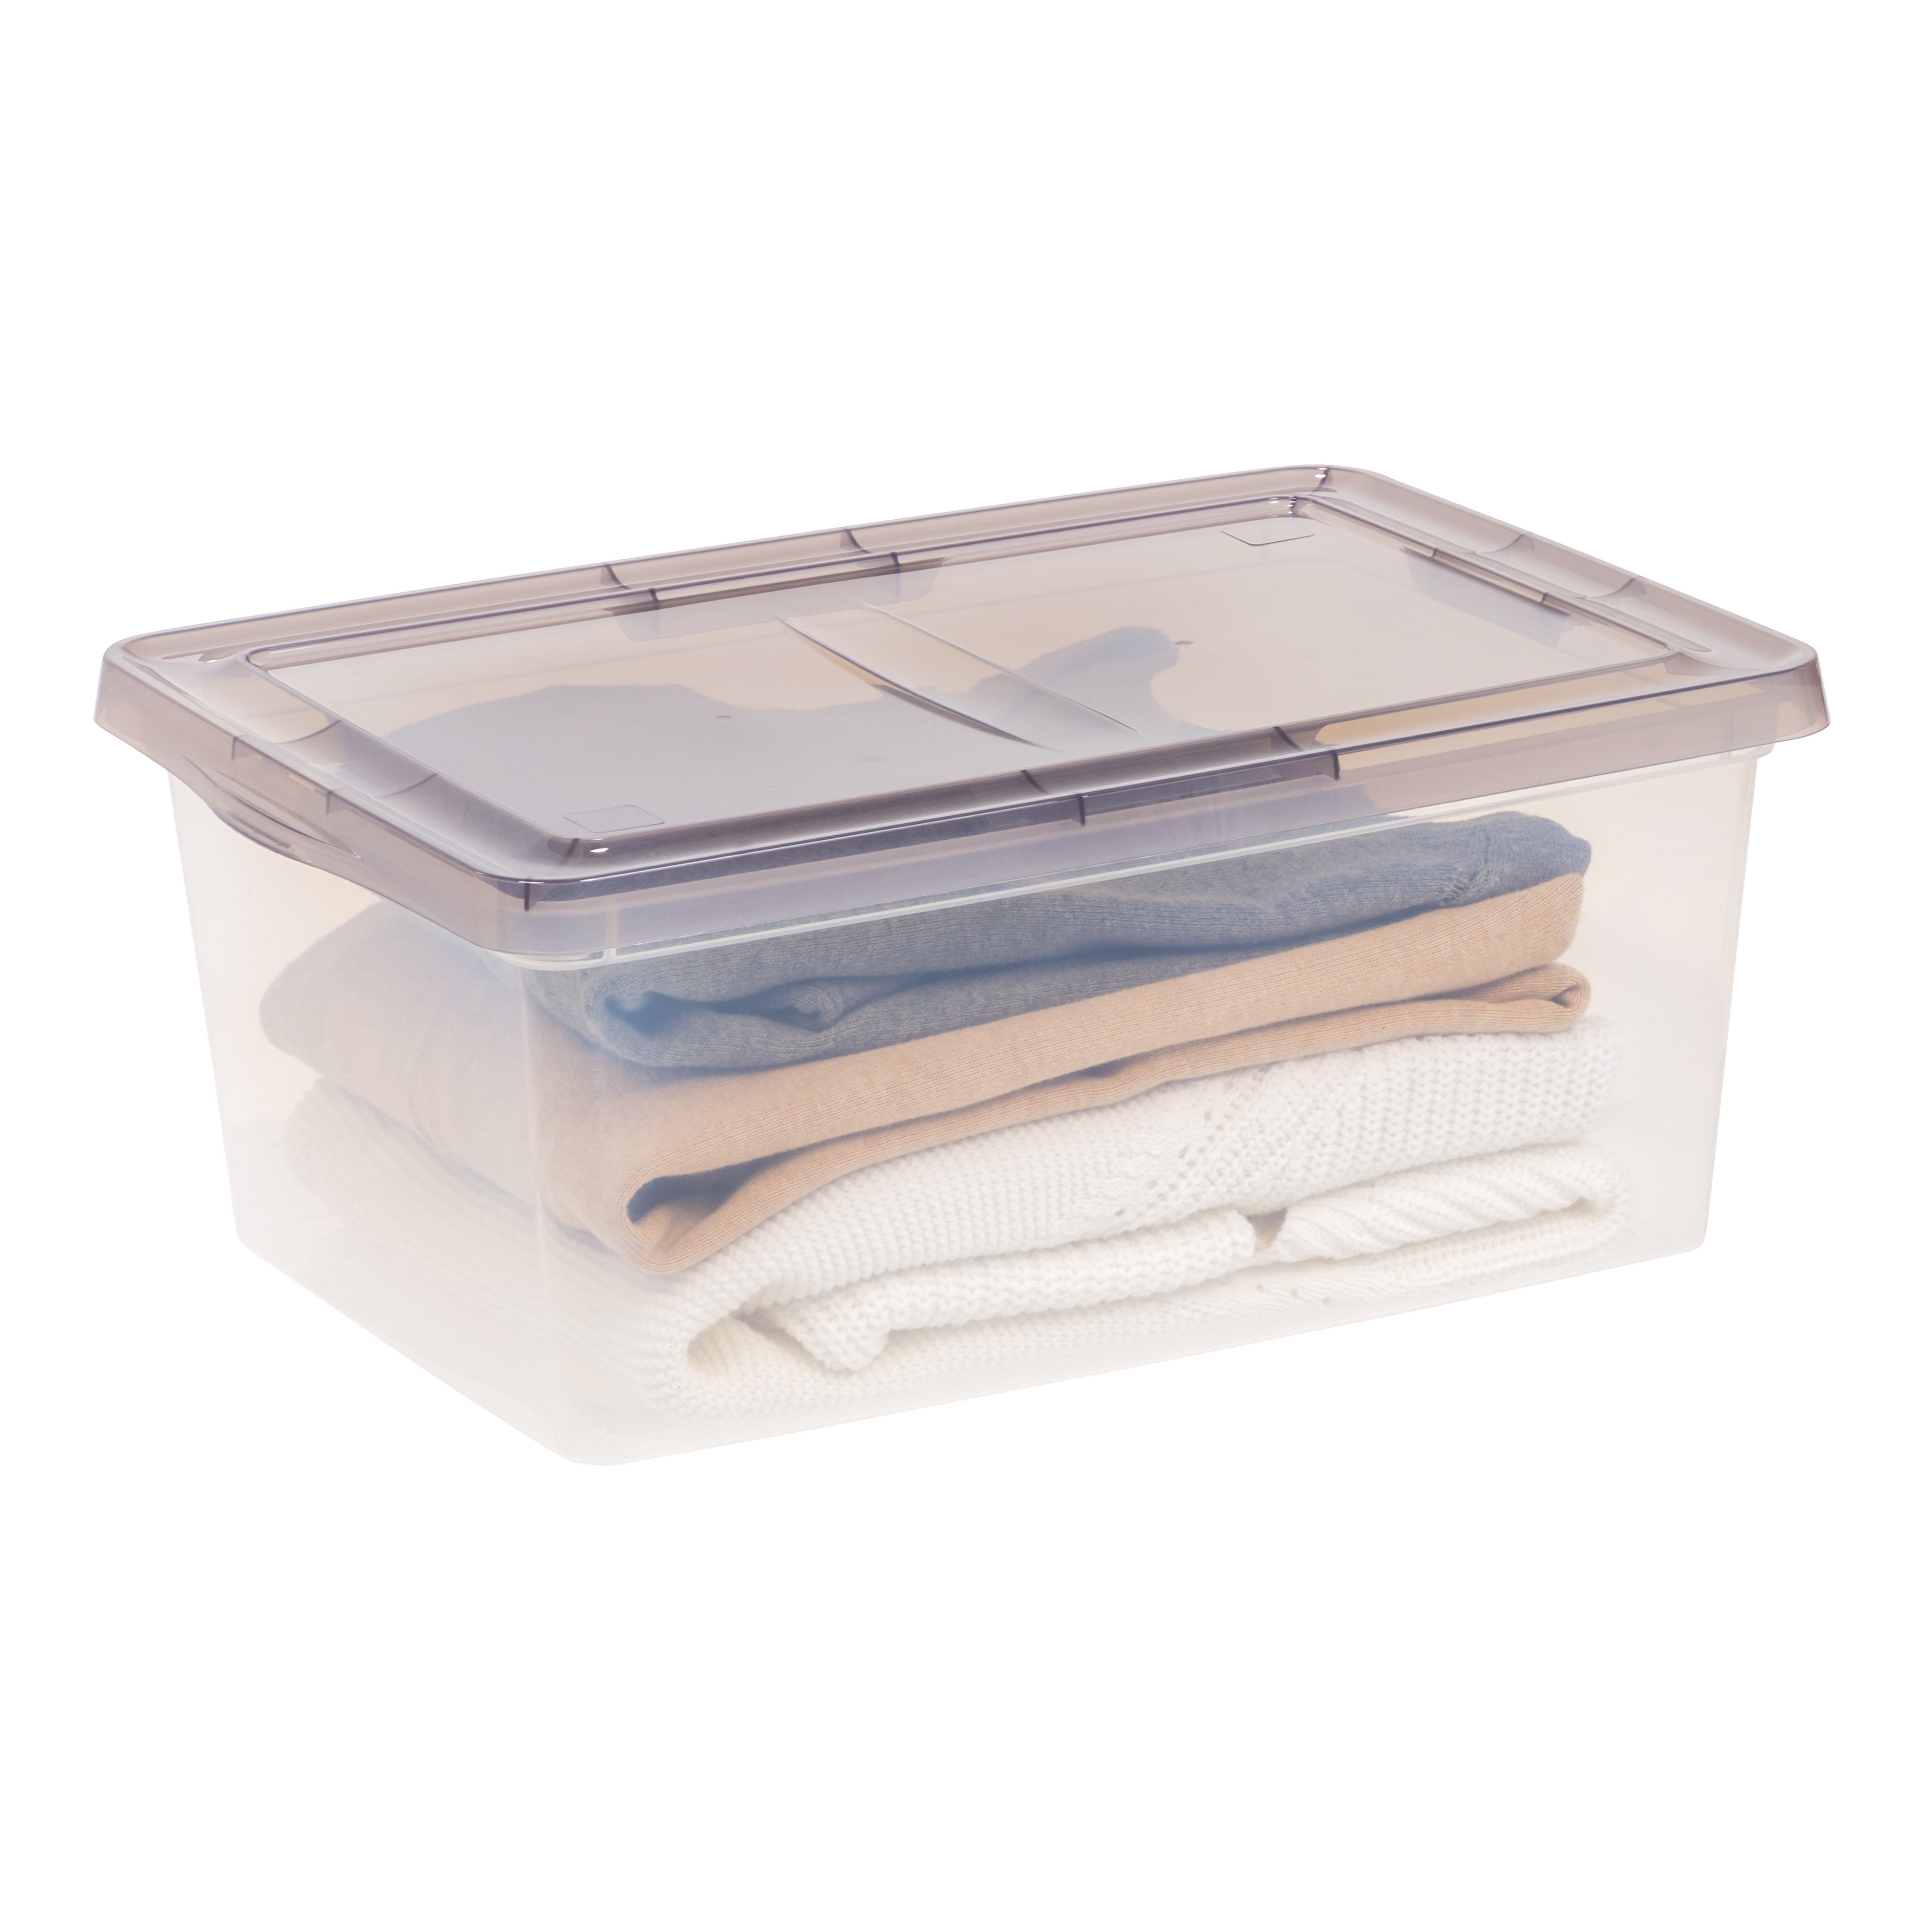 s Best-Selling Storage Containers Start at $17